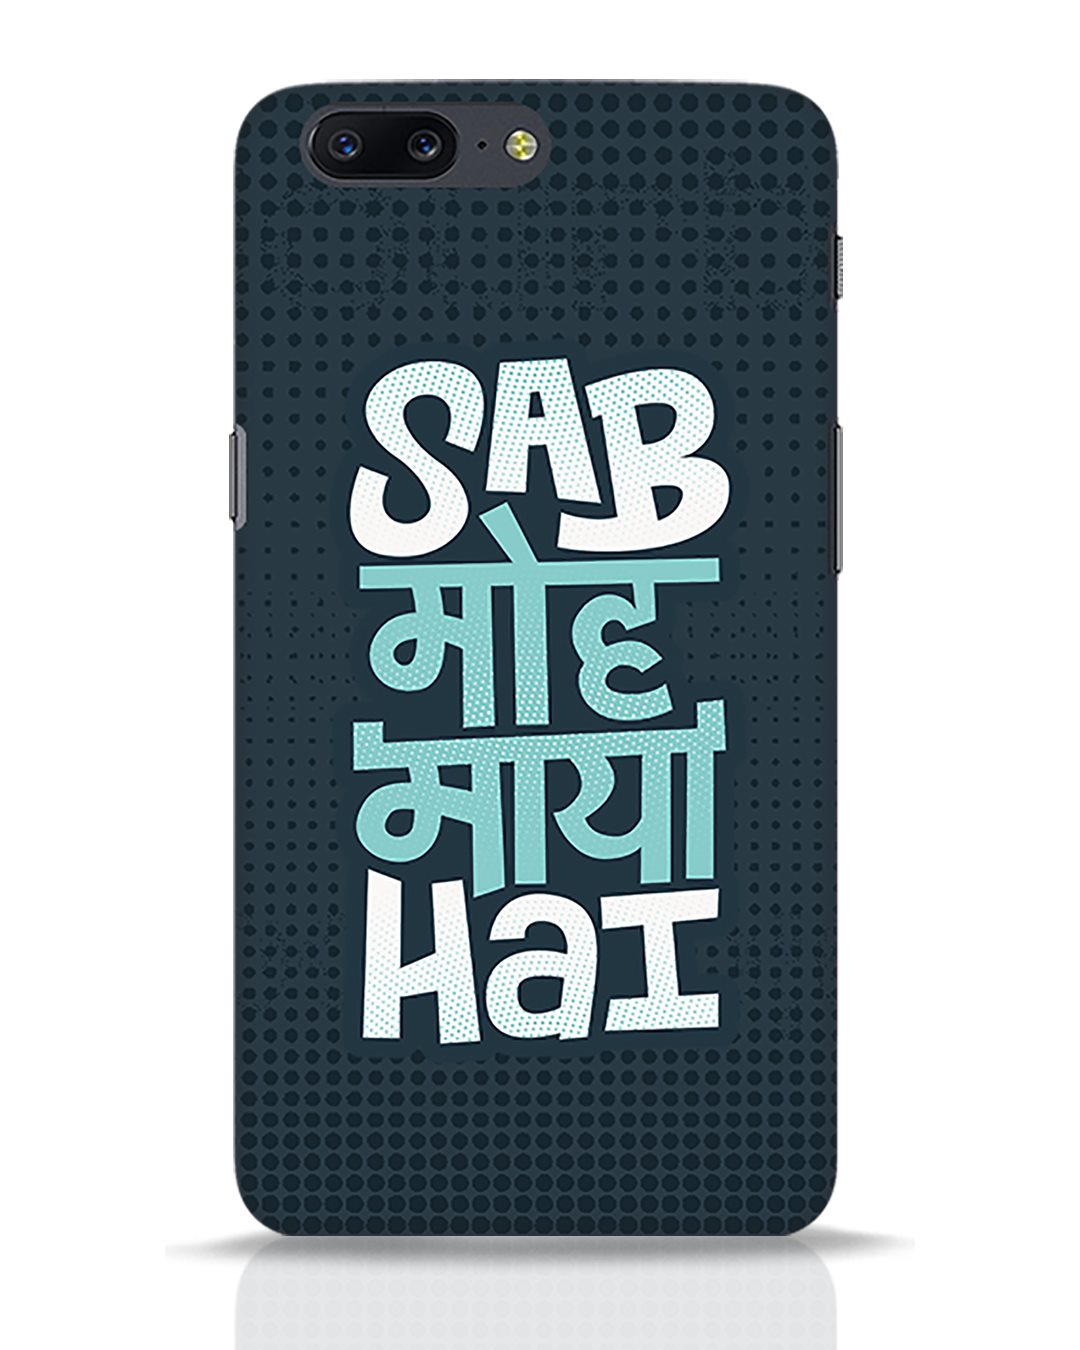 Buy Sab Moh Maya Hai OnePlus 5 Mobile Cover for Unisex OnePlus 5 ...